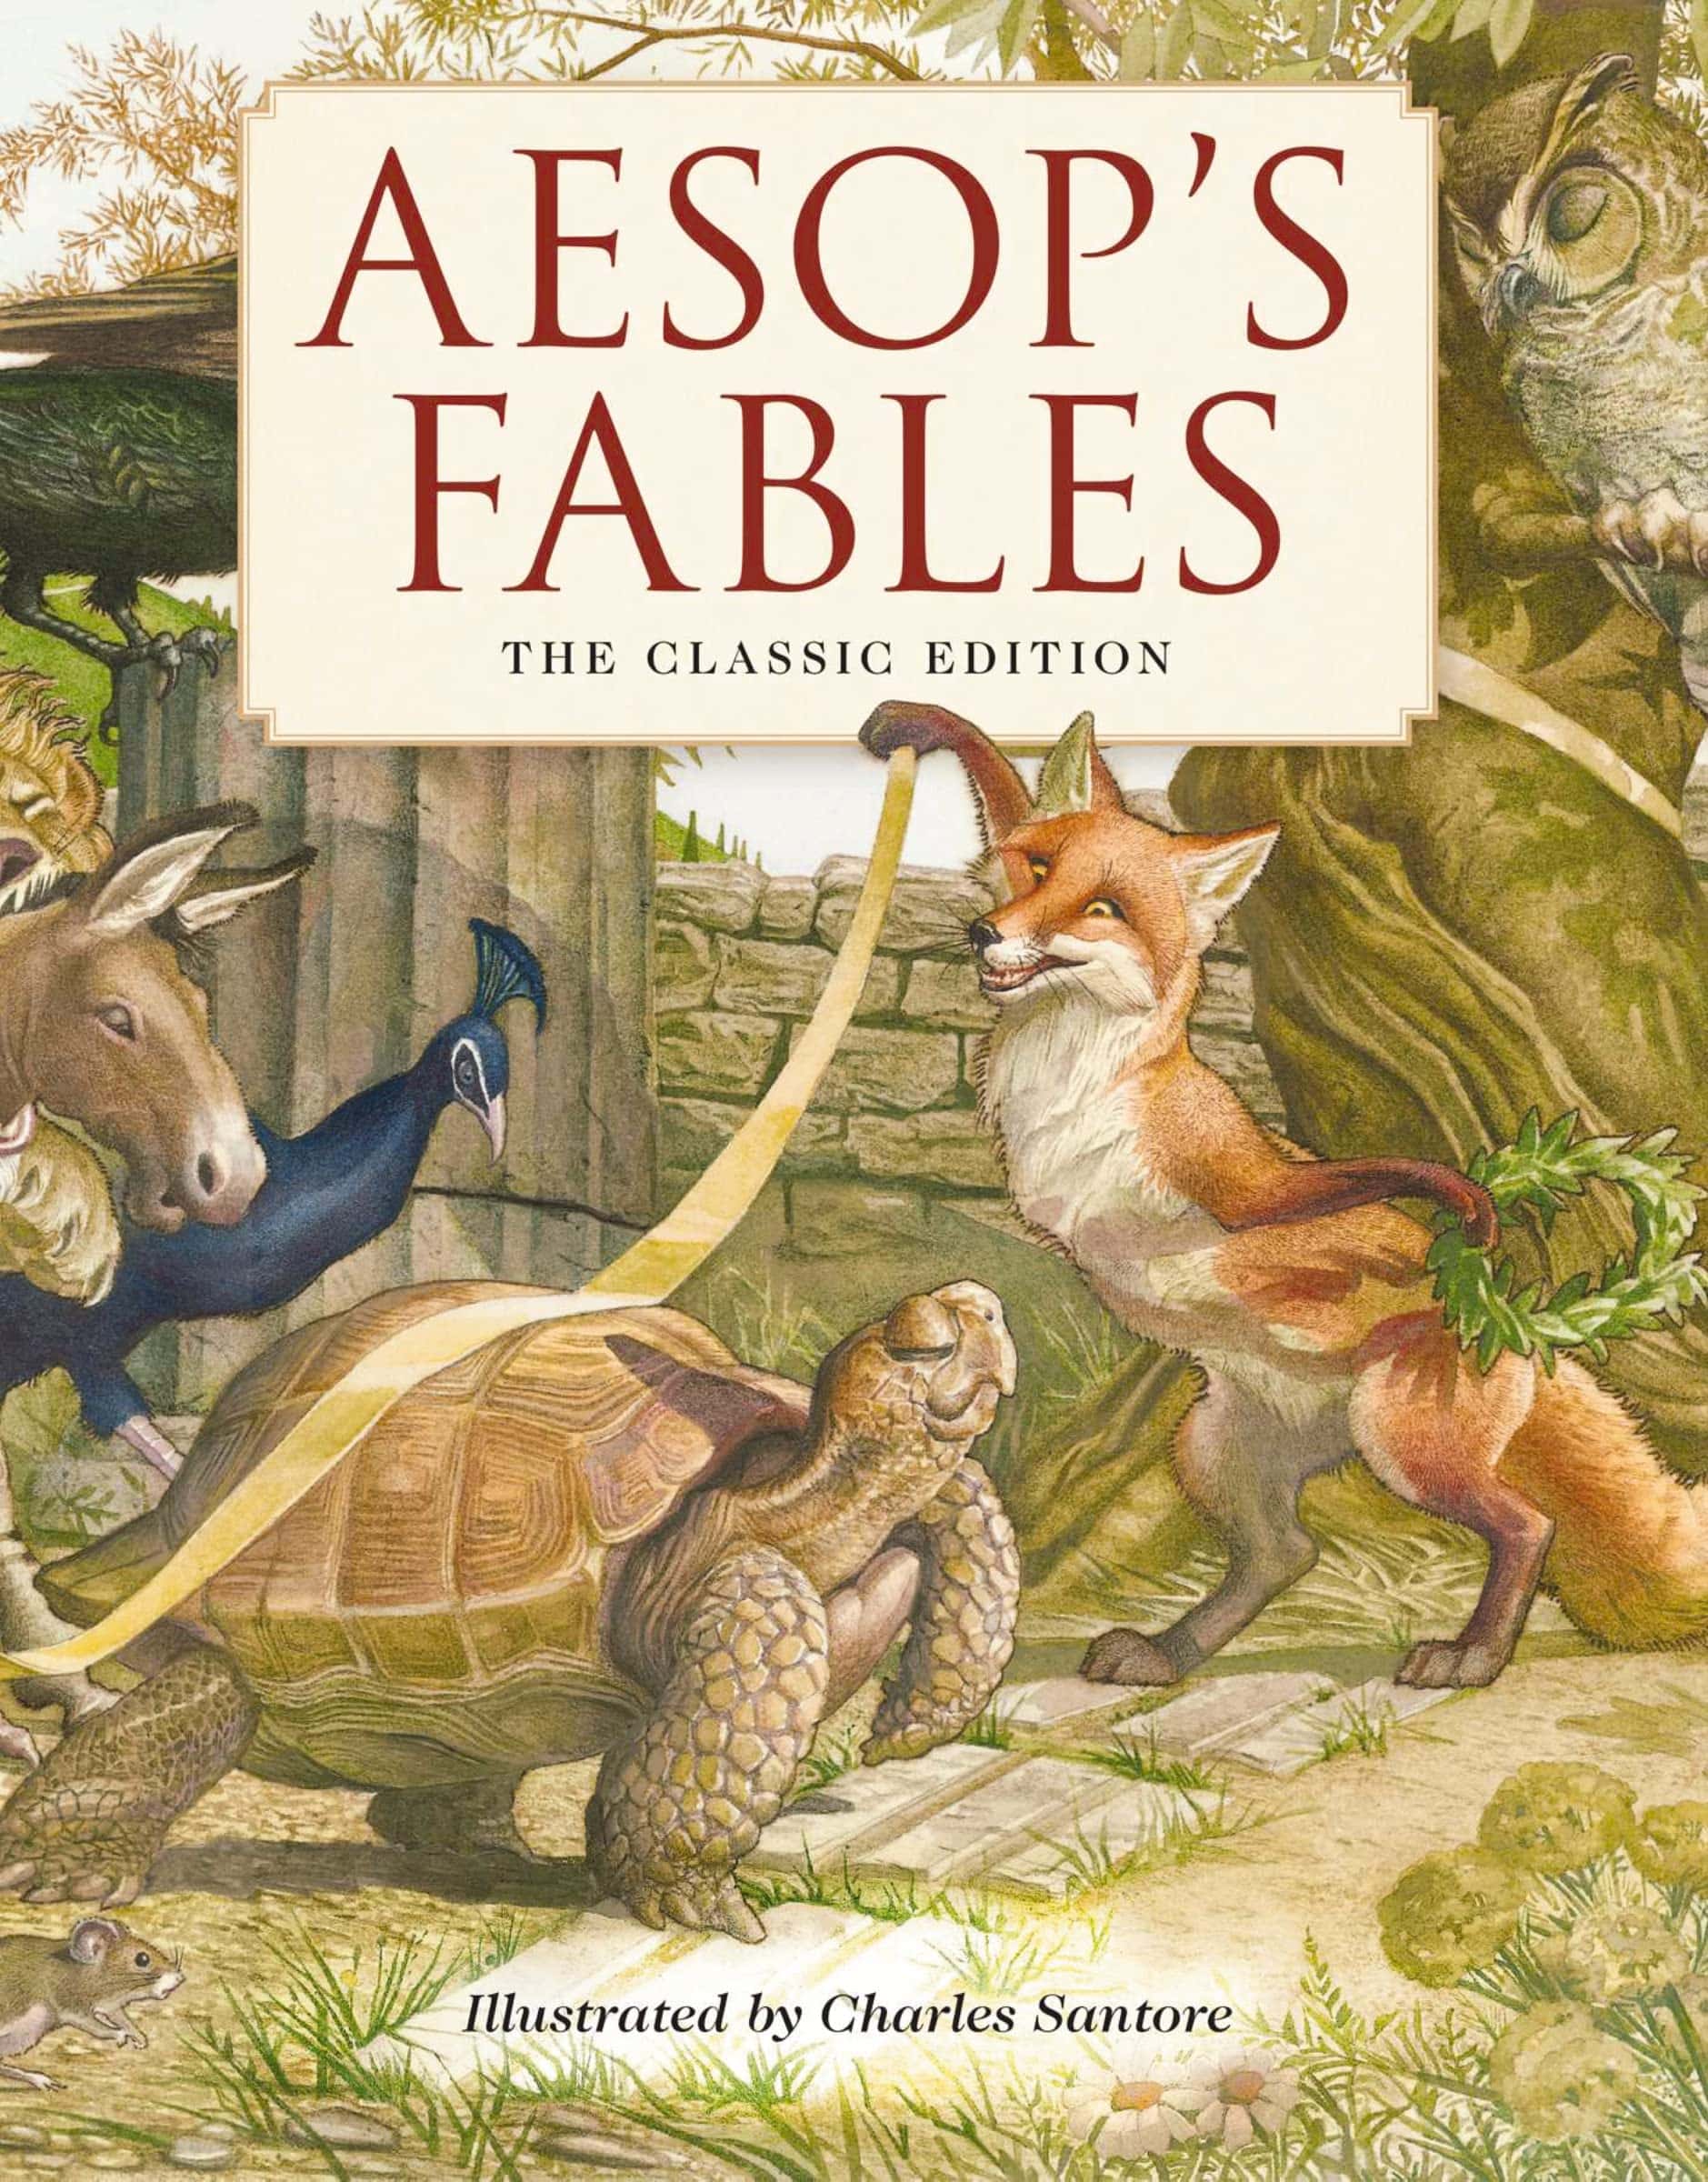 "Aesop's Fables Hardcover: The Classic Edition" Book Cover